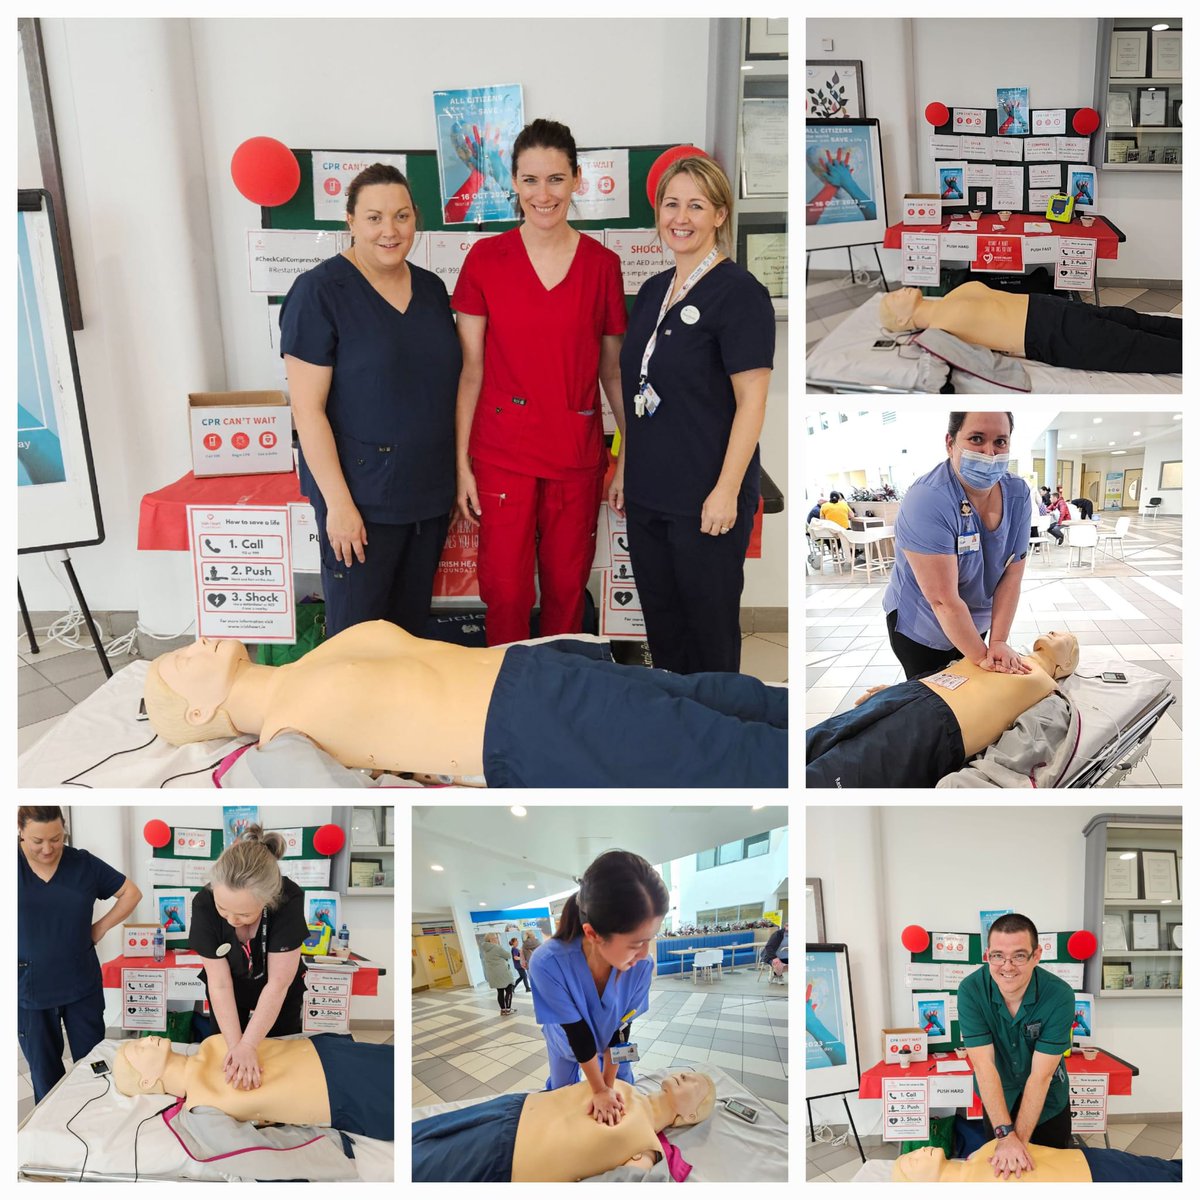 How to save a life? Call, Push, Shock. Nicola Kearney (RTO) did great work promoting #RestartAHeartDay tp staff & the public in #naasgeneralhospital #CPRSavesLives, @murphy2_anne @NiamhKBarrett @DMHospitalGroup